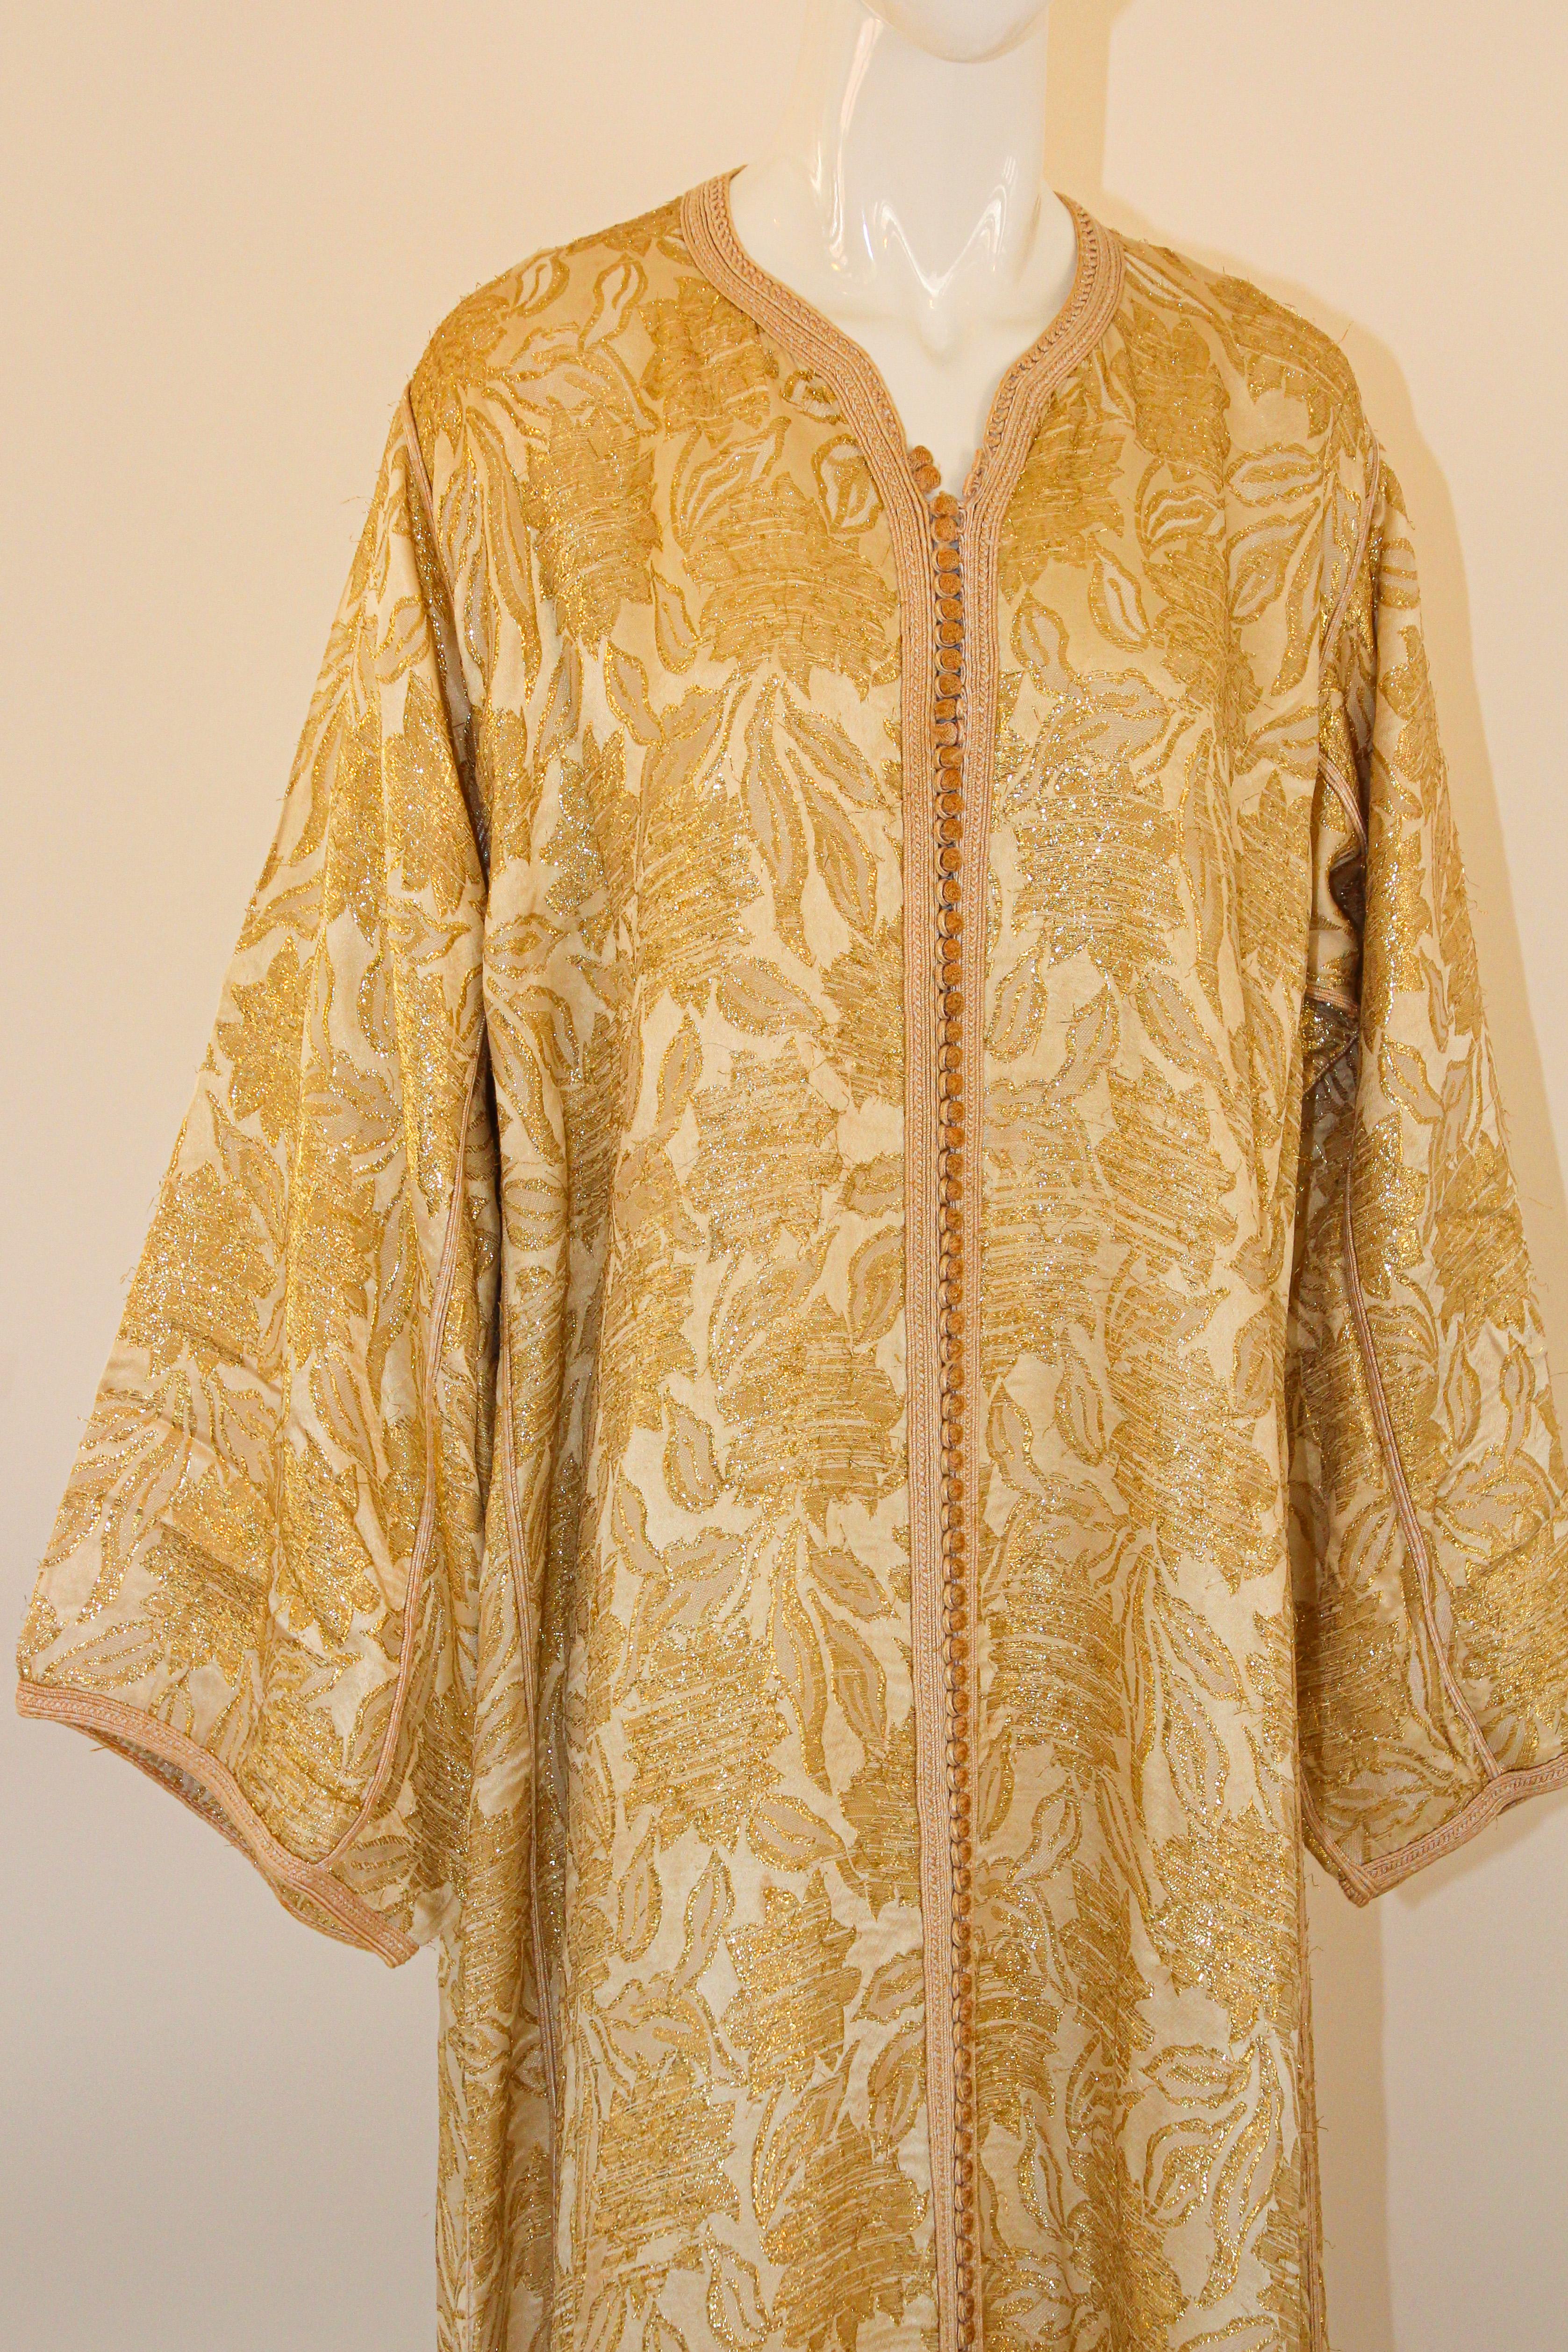 Women's or Men's 1940s Moroccan Antique Caftan Gold Damask Embroidered Caftan Maxi Dress For Sale